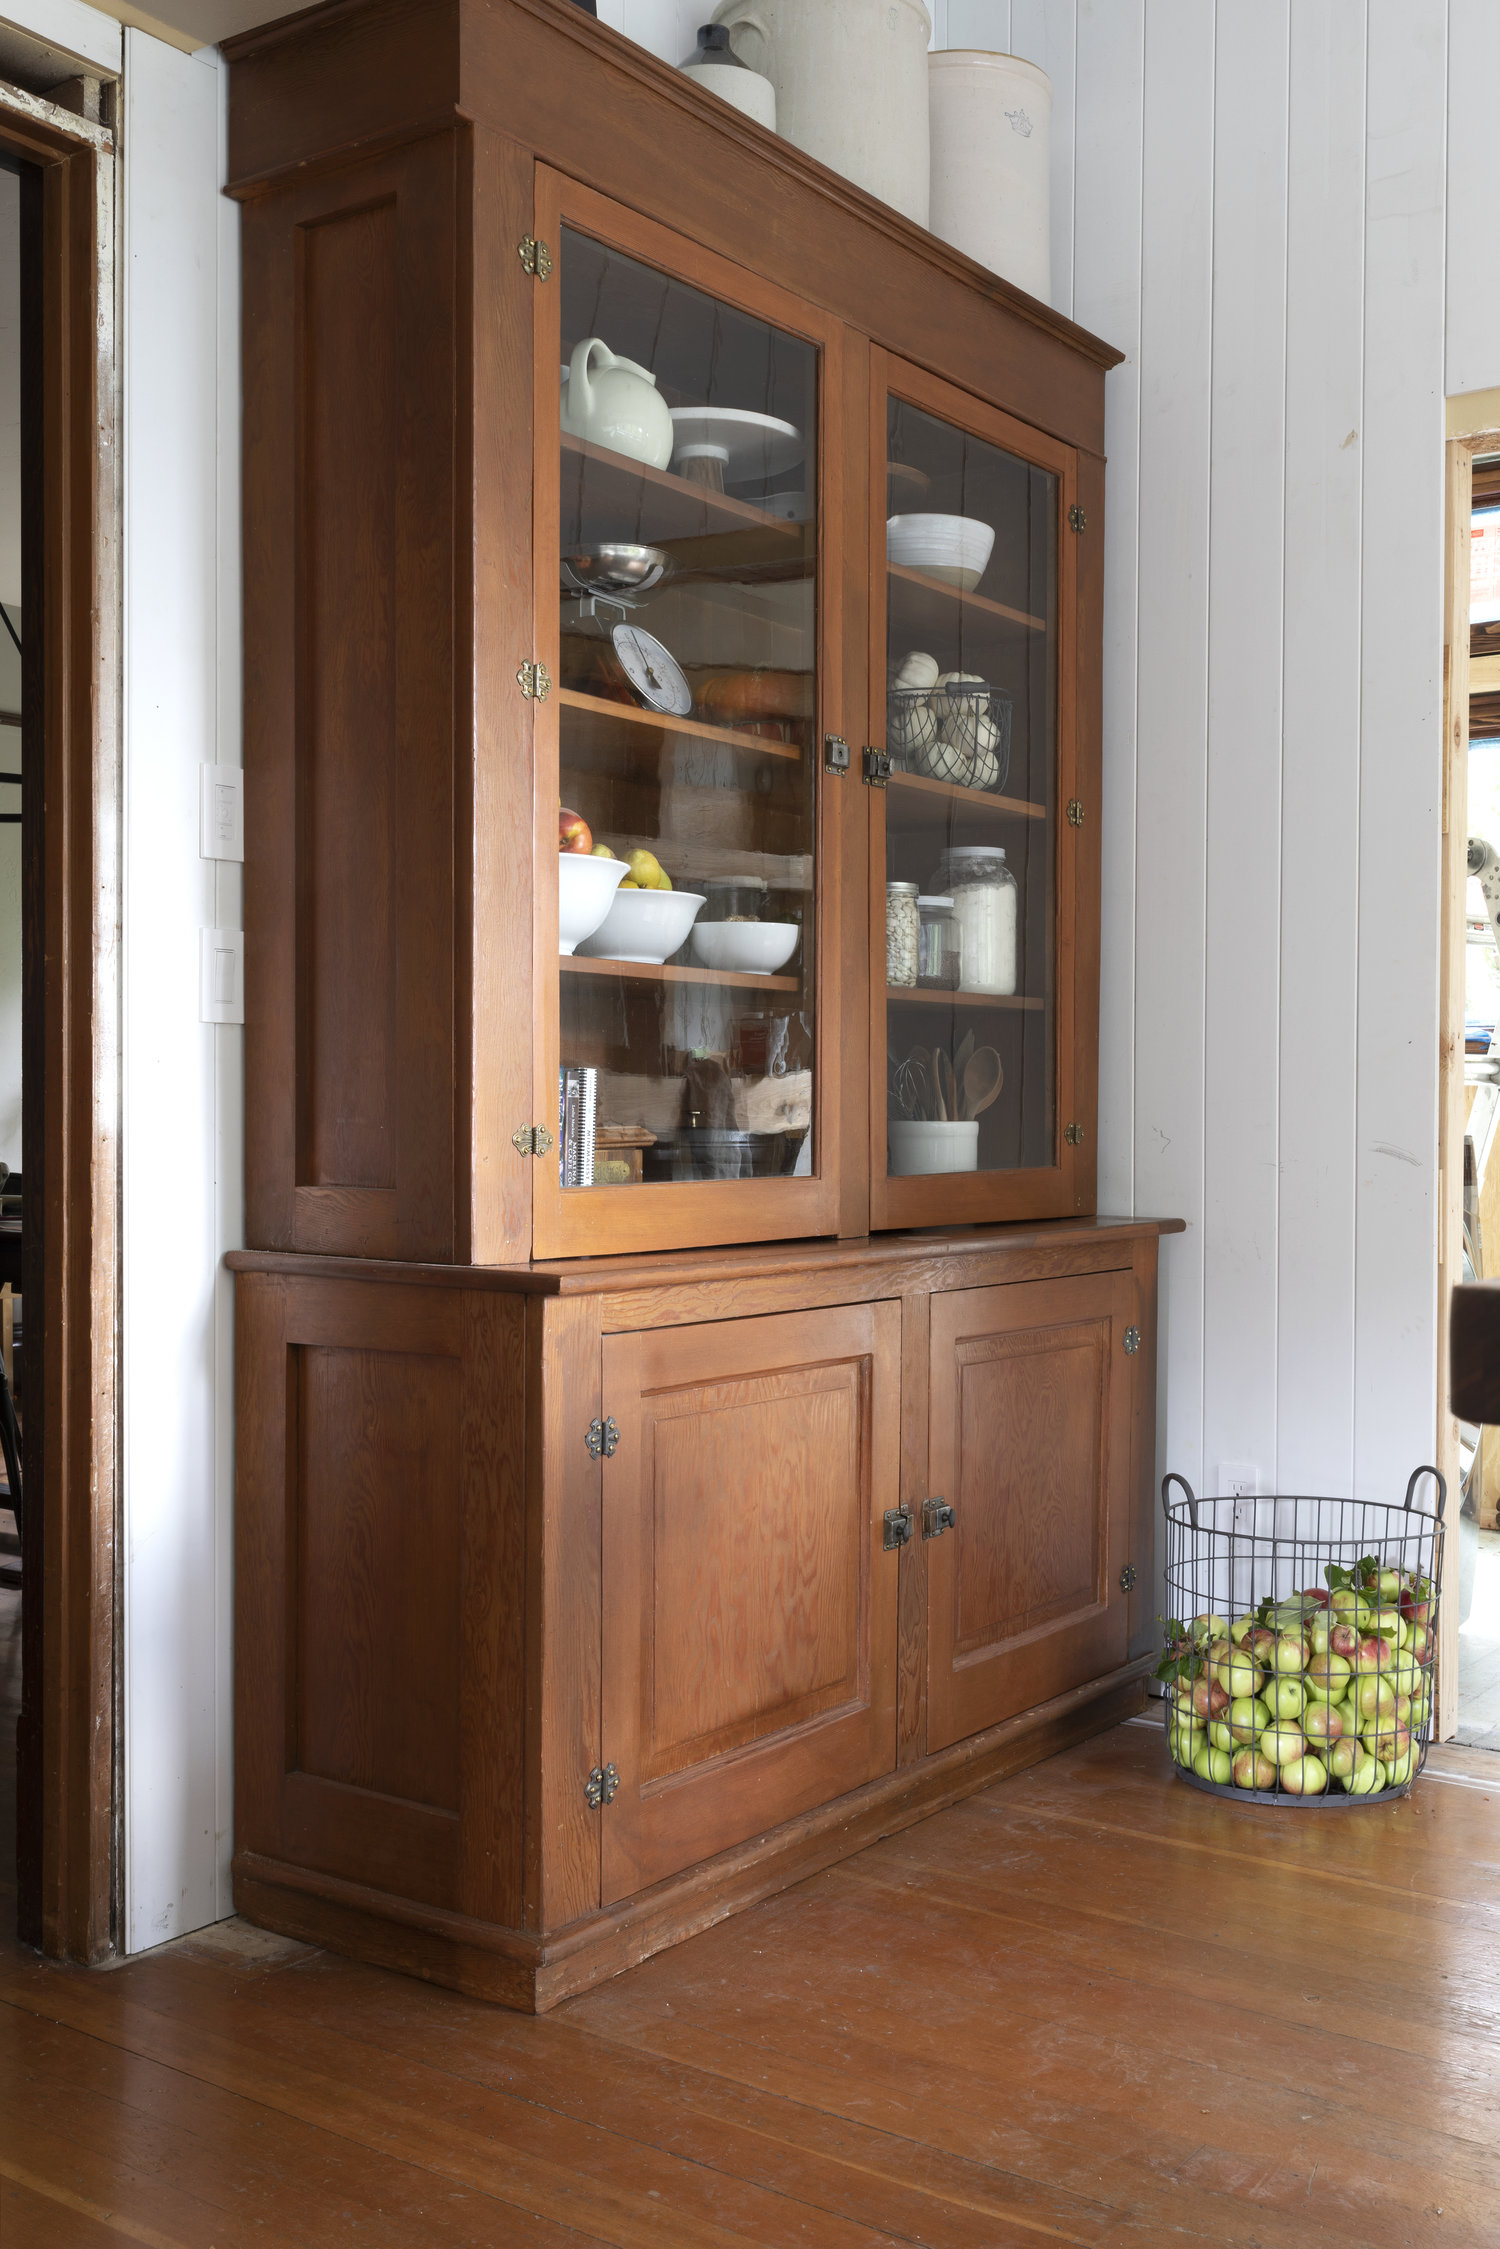 Incorporating Vintage Furniture Into a Kitchen Remodel — The Grit ...